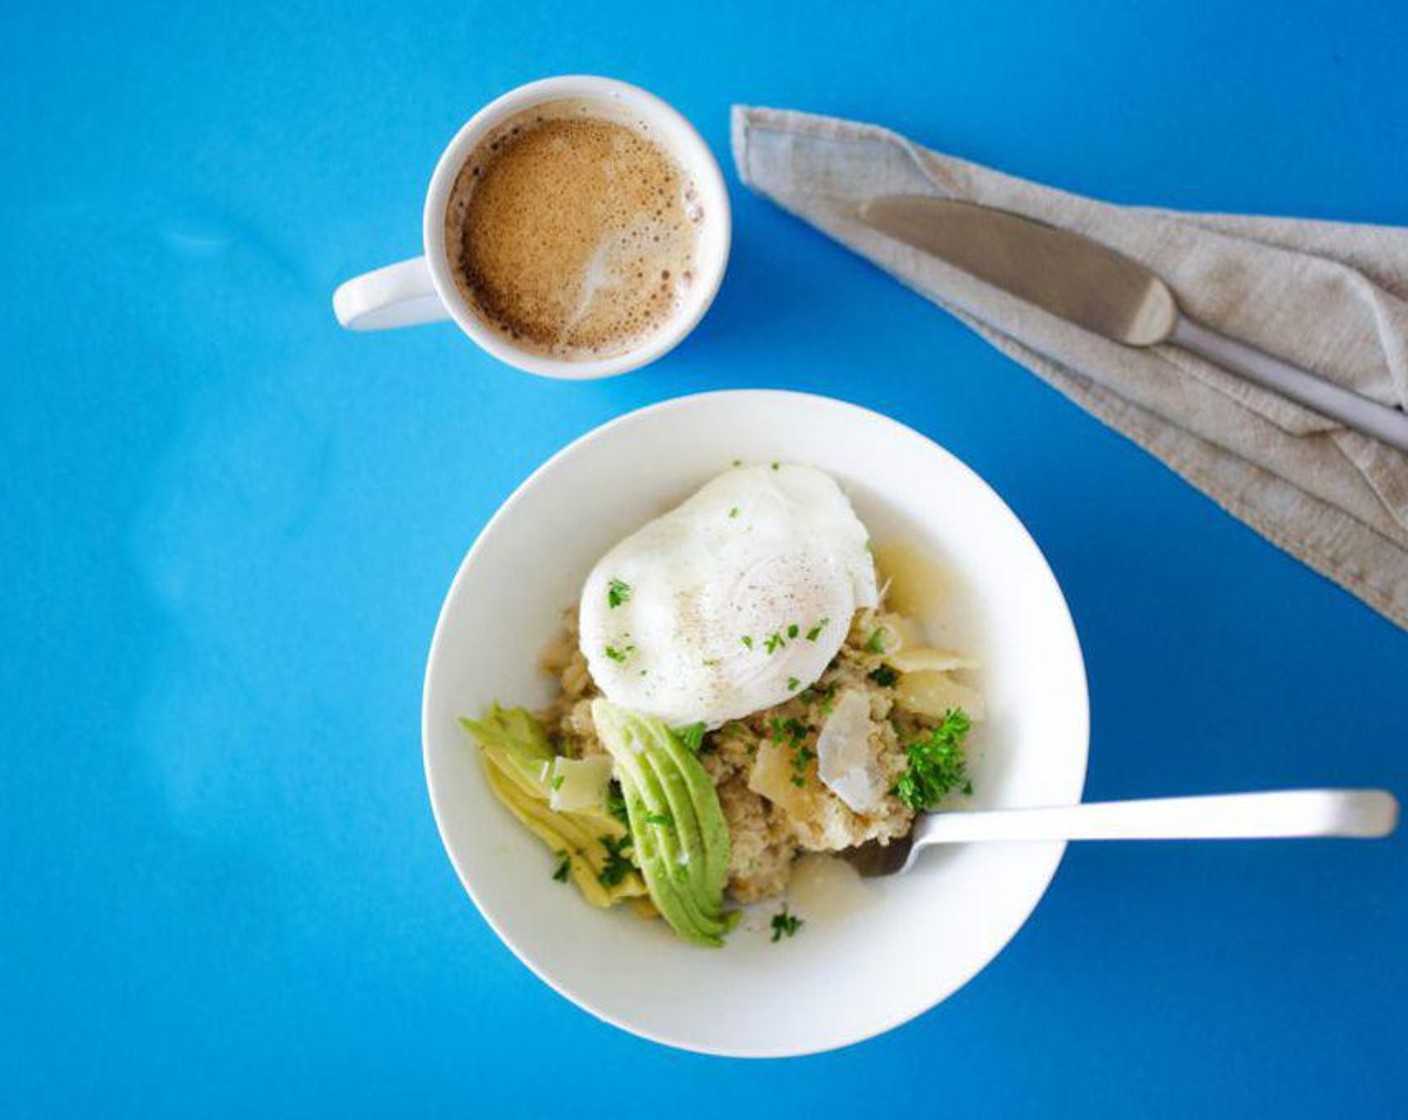 Savory Oatmeal with Avocado and Poached Egg